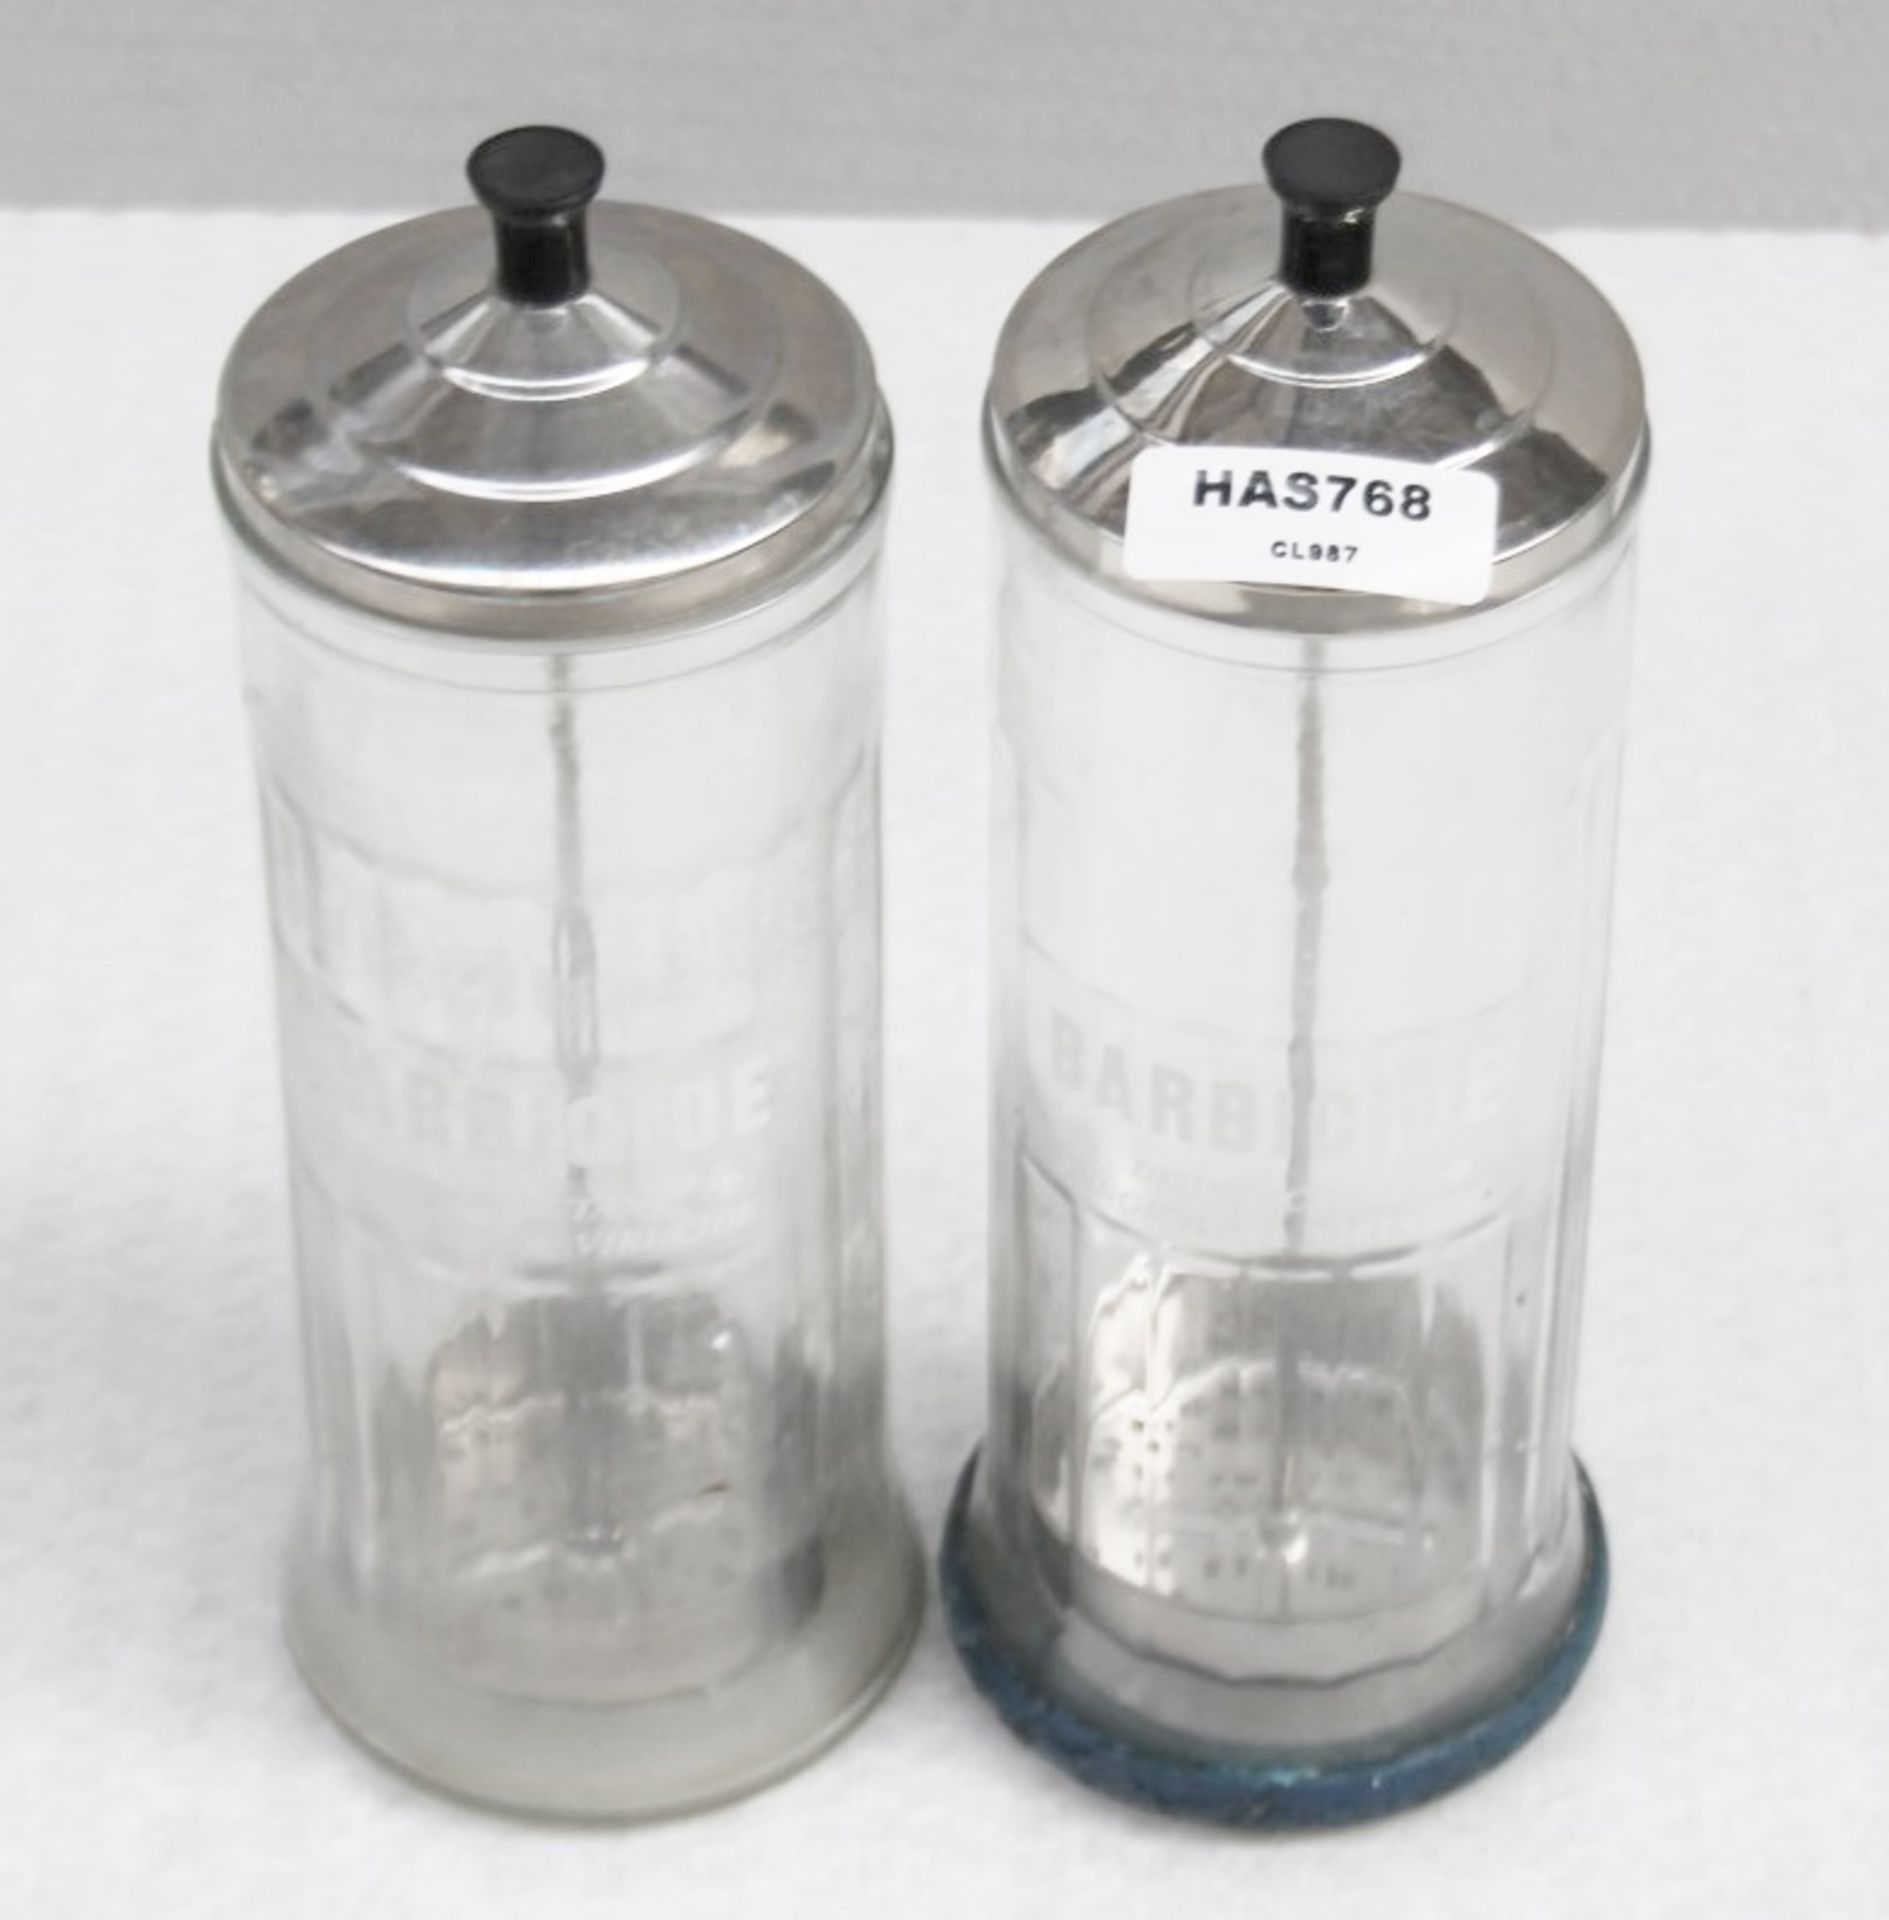 2 x Barbicide Jars - Dimensions: H28 x Ø10cm - Recently Removed From A Boutique Hair Salon - Ref: